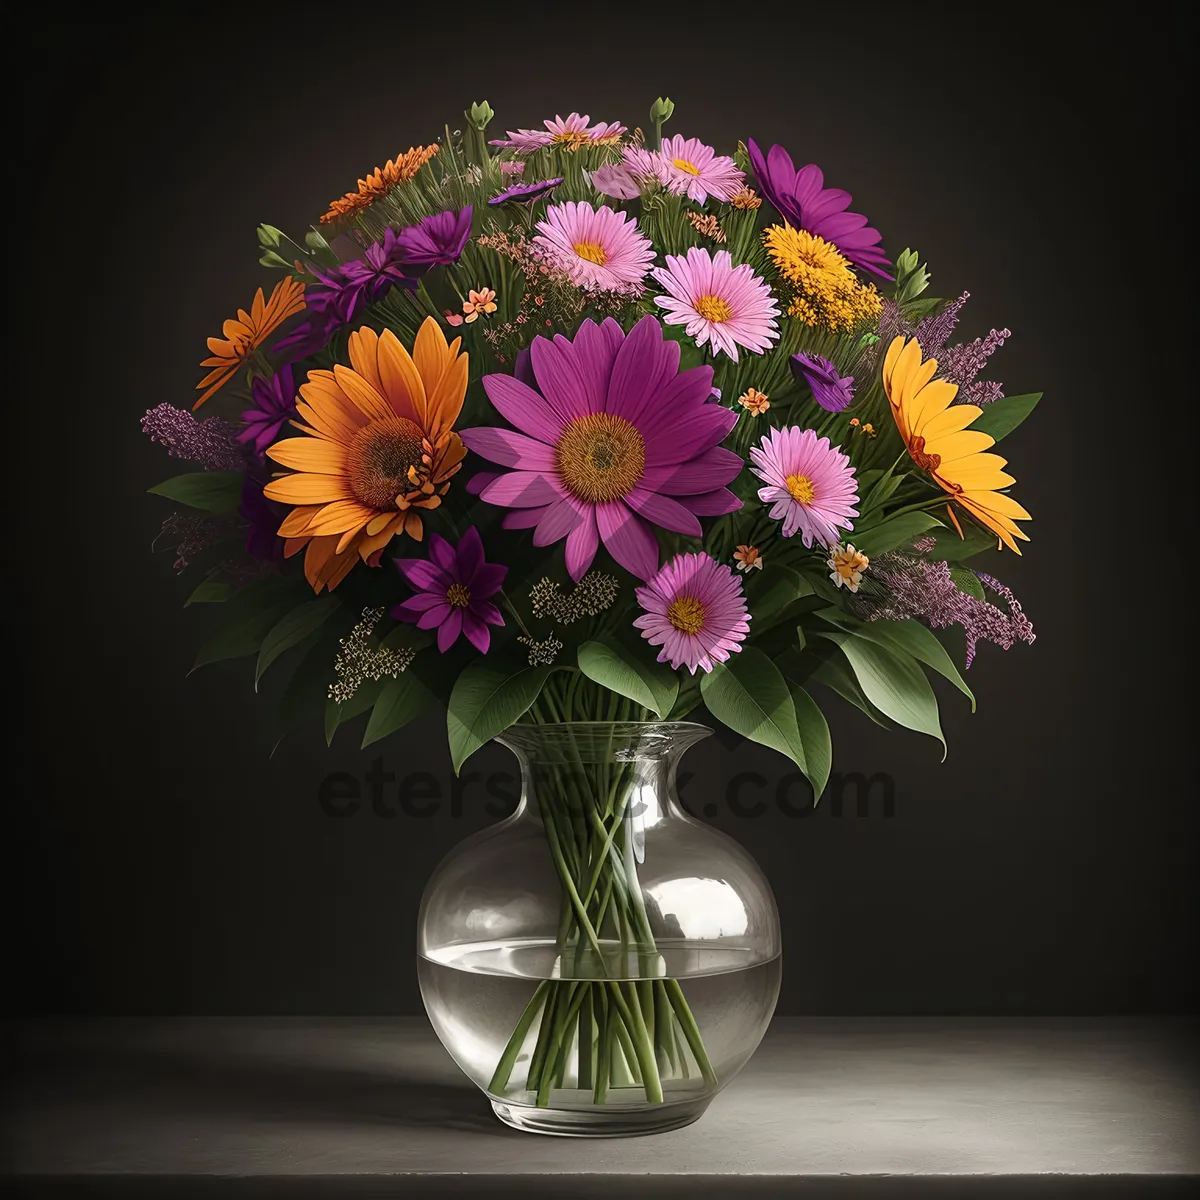 Picture of Vibrant Floral Bouquet: Daisy and Sunflower Delight